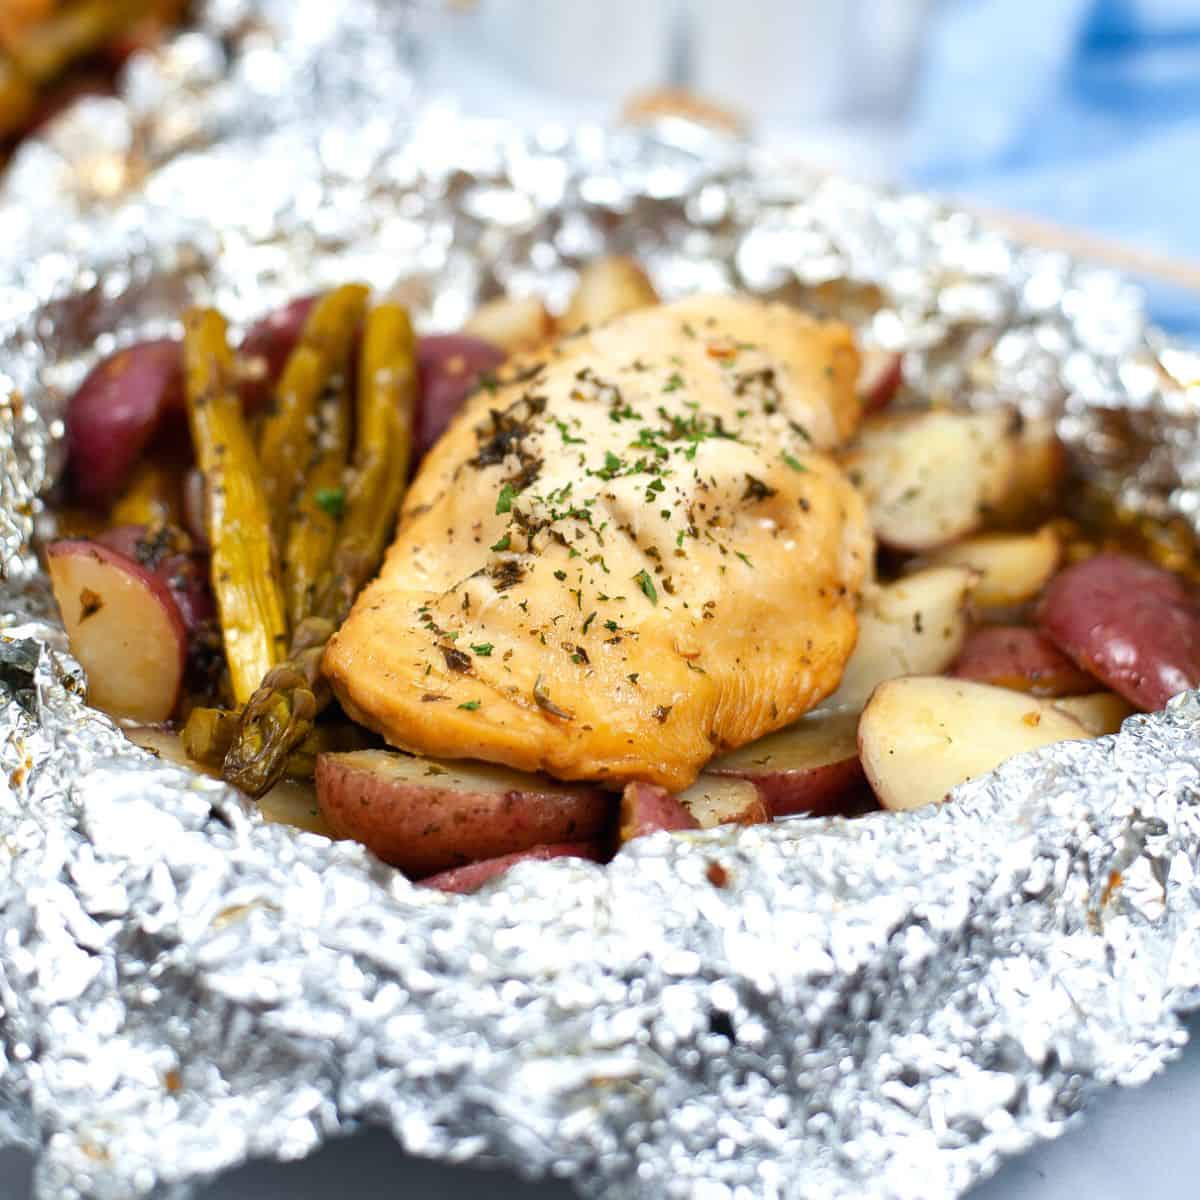 Foil Packet Chicken Breast Dinner, a simple Mediterranean diet friendly individual meal idea that is perfect for barbecues and campfires.